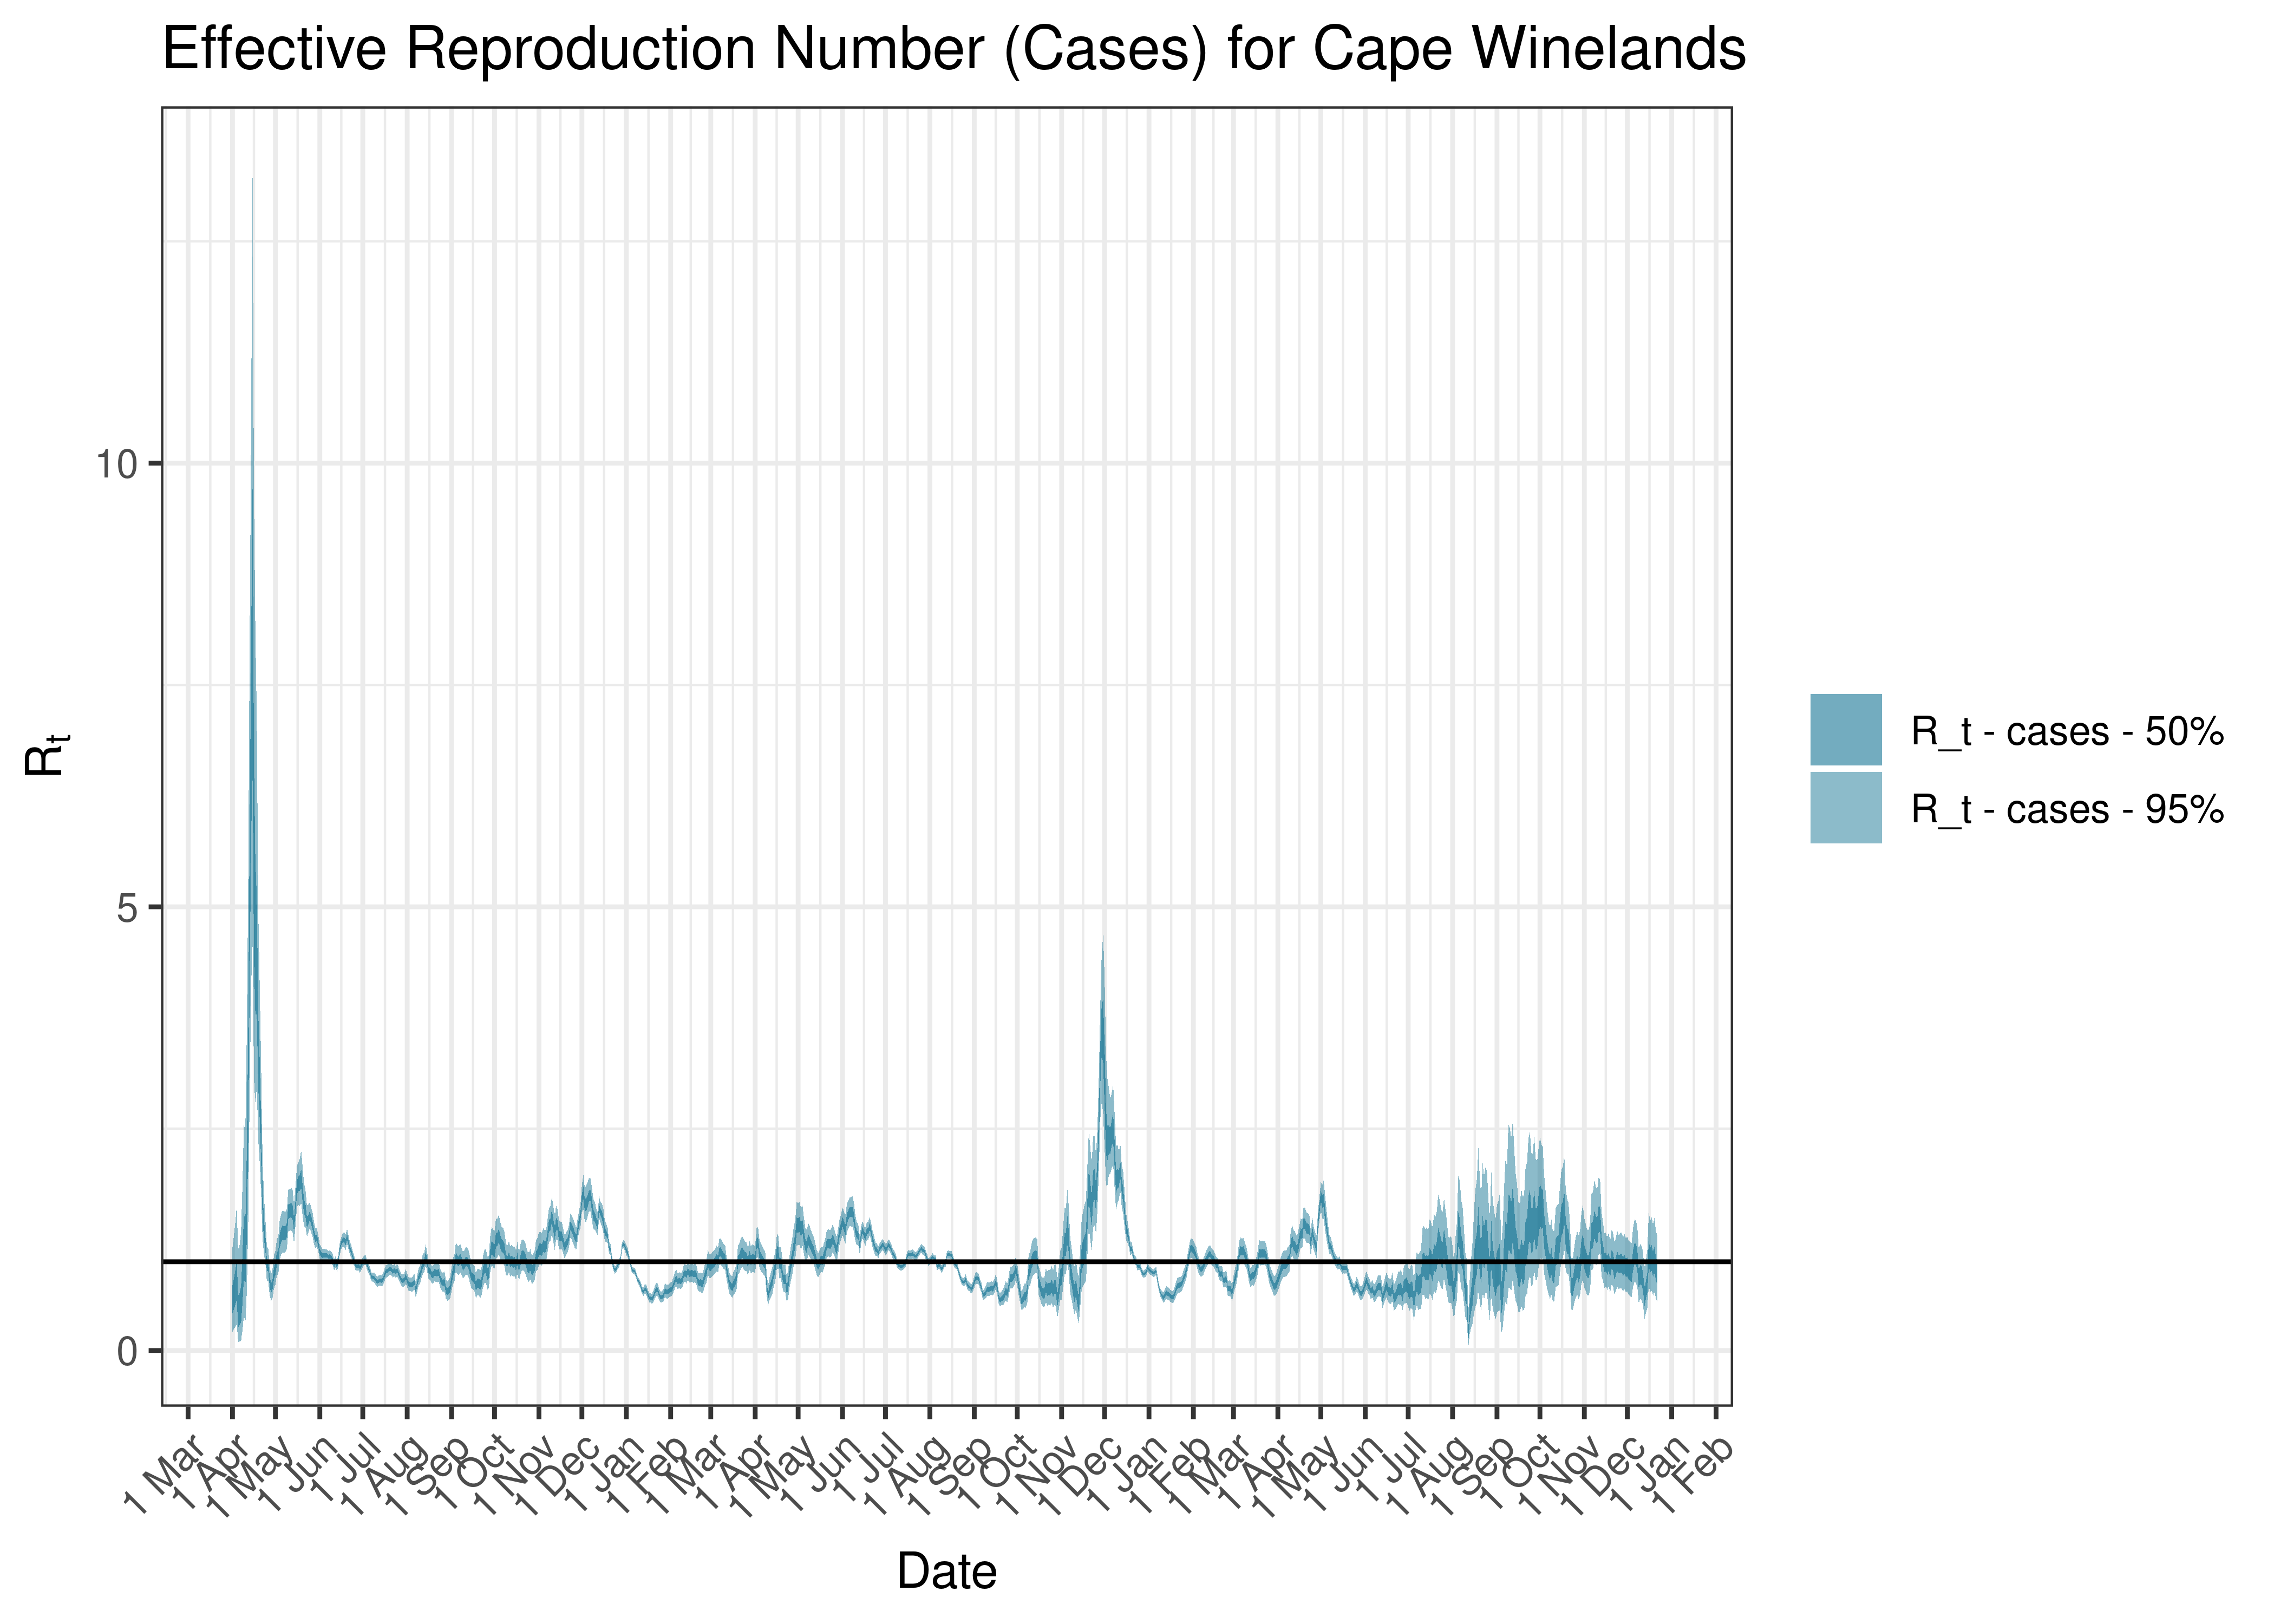 Estimated Effective Reproduction Number Based on Cases for Cape Winelands since 1 April 2020